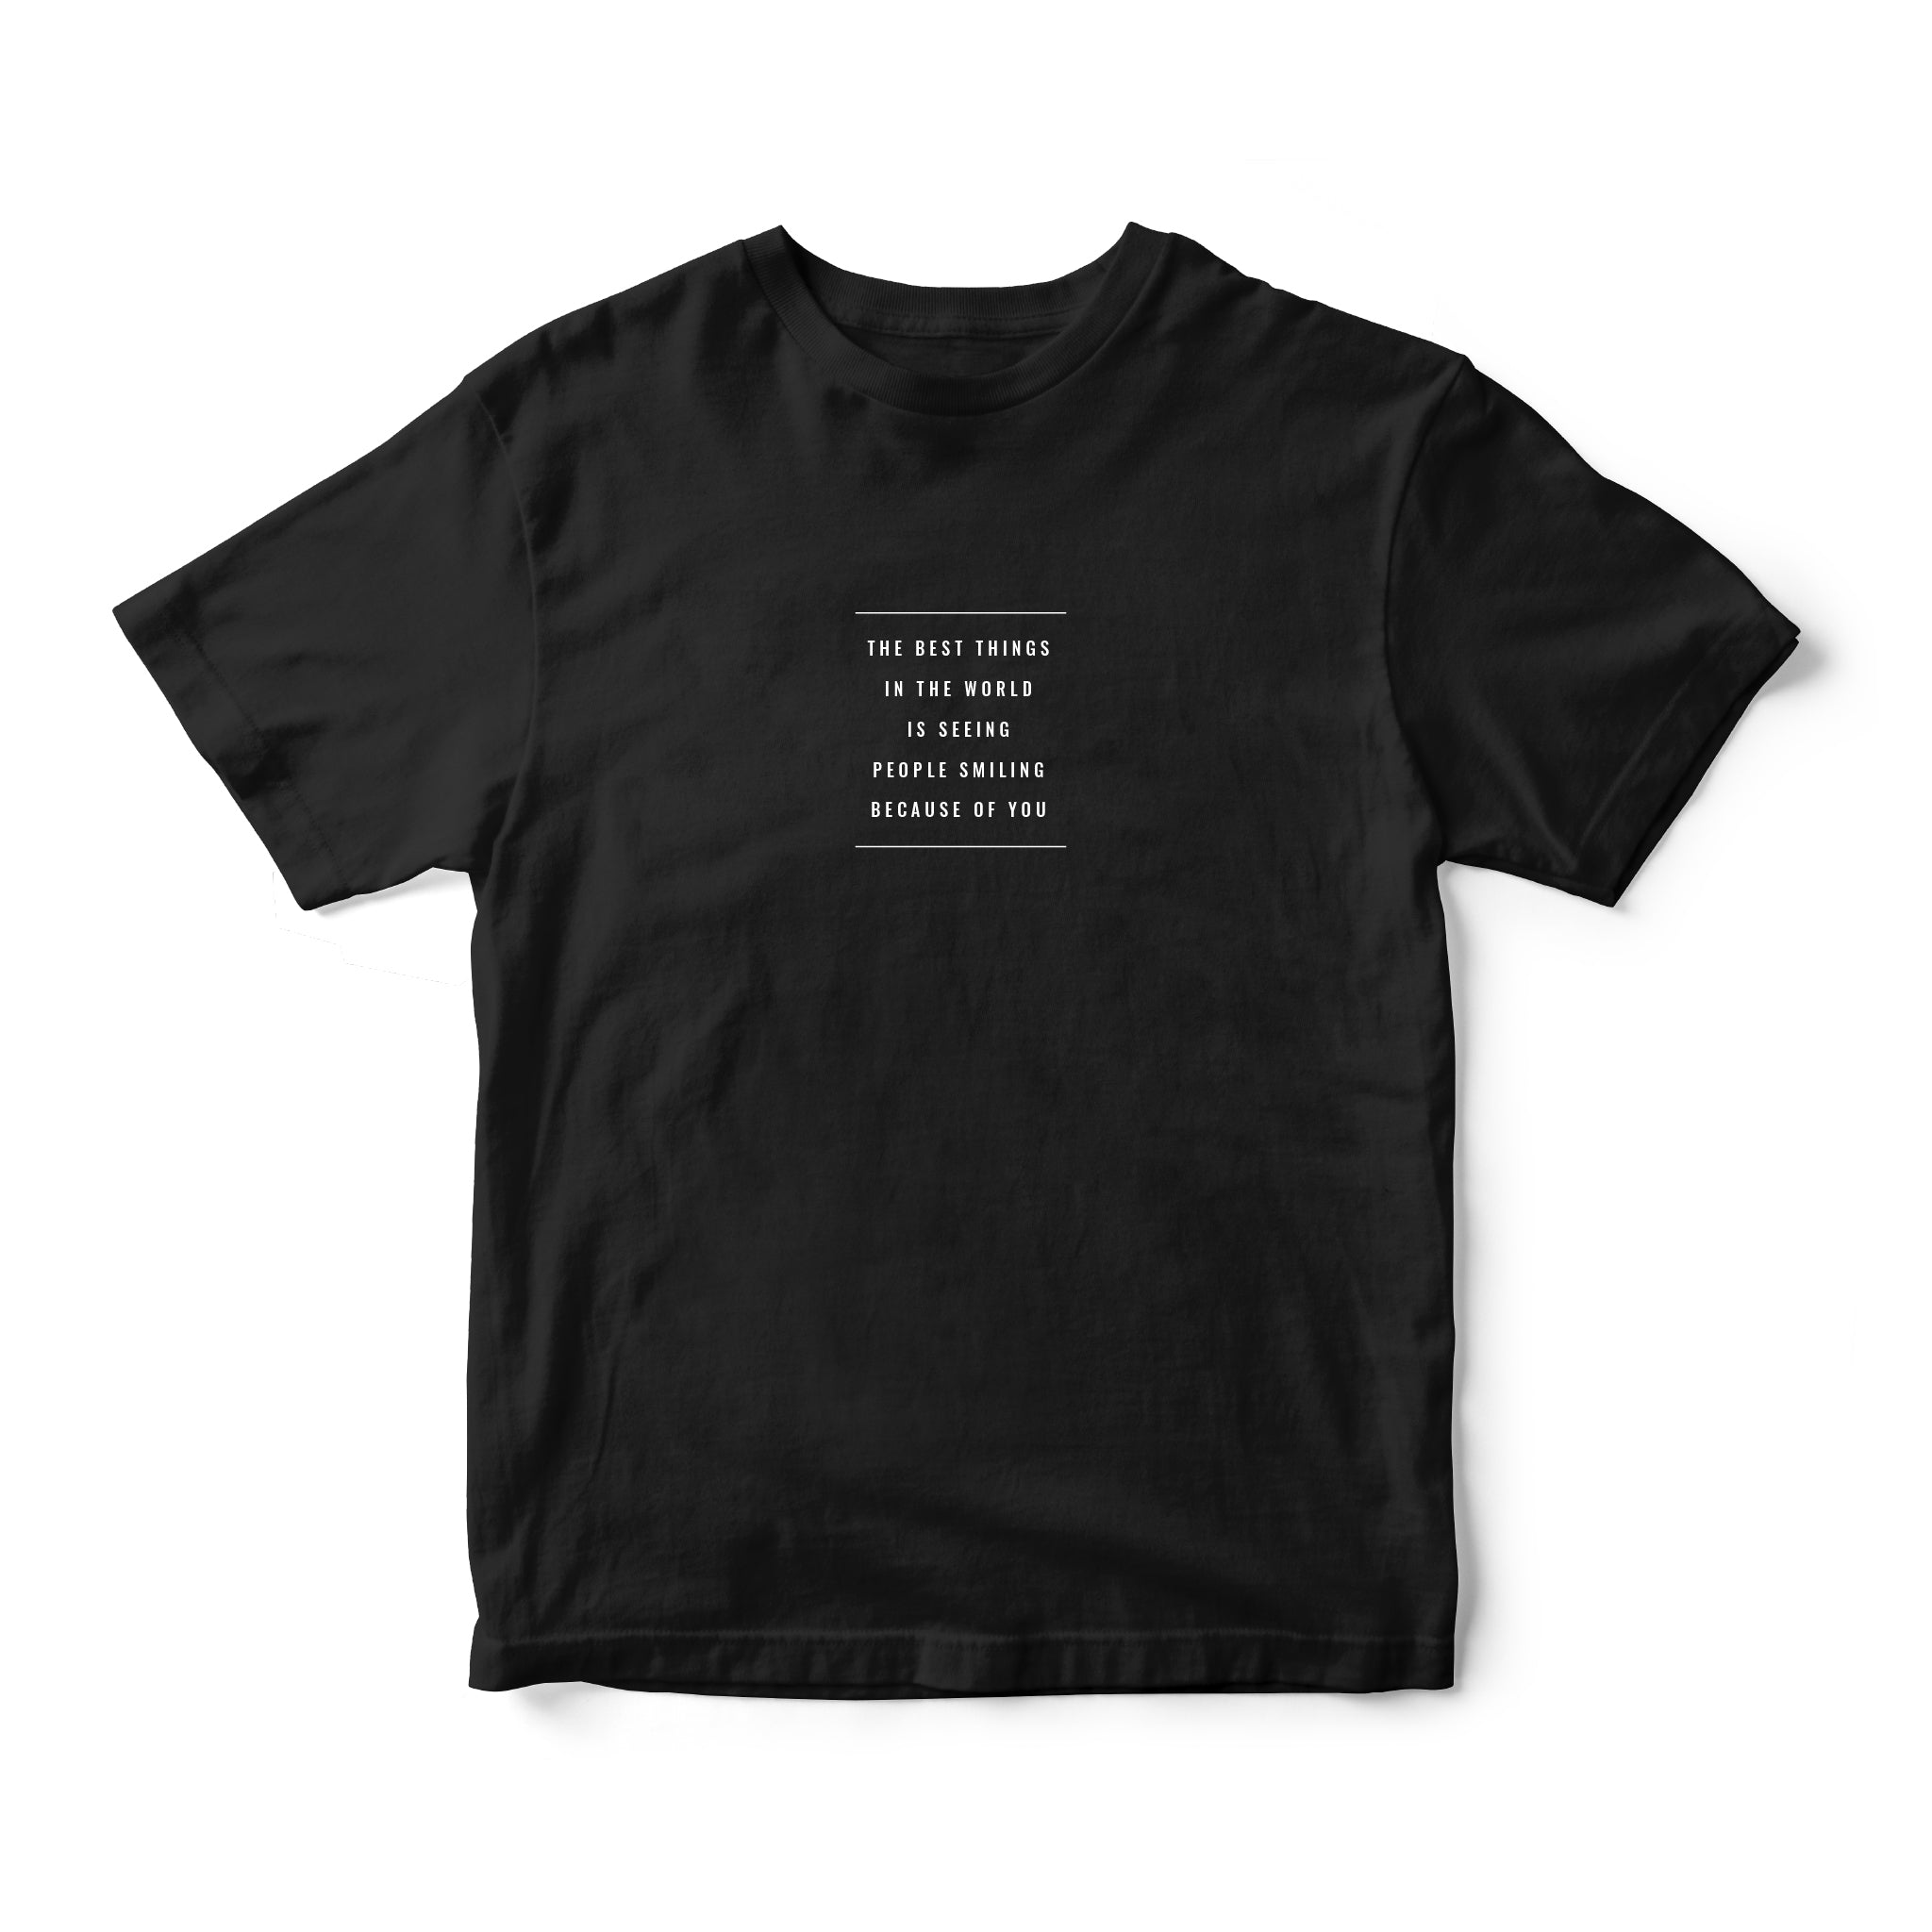 Instee Seeing People Smiling T-shirt Unisex 100% Cotton